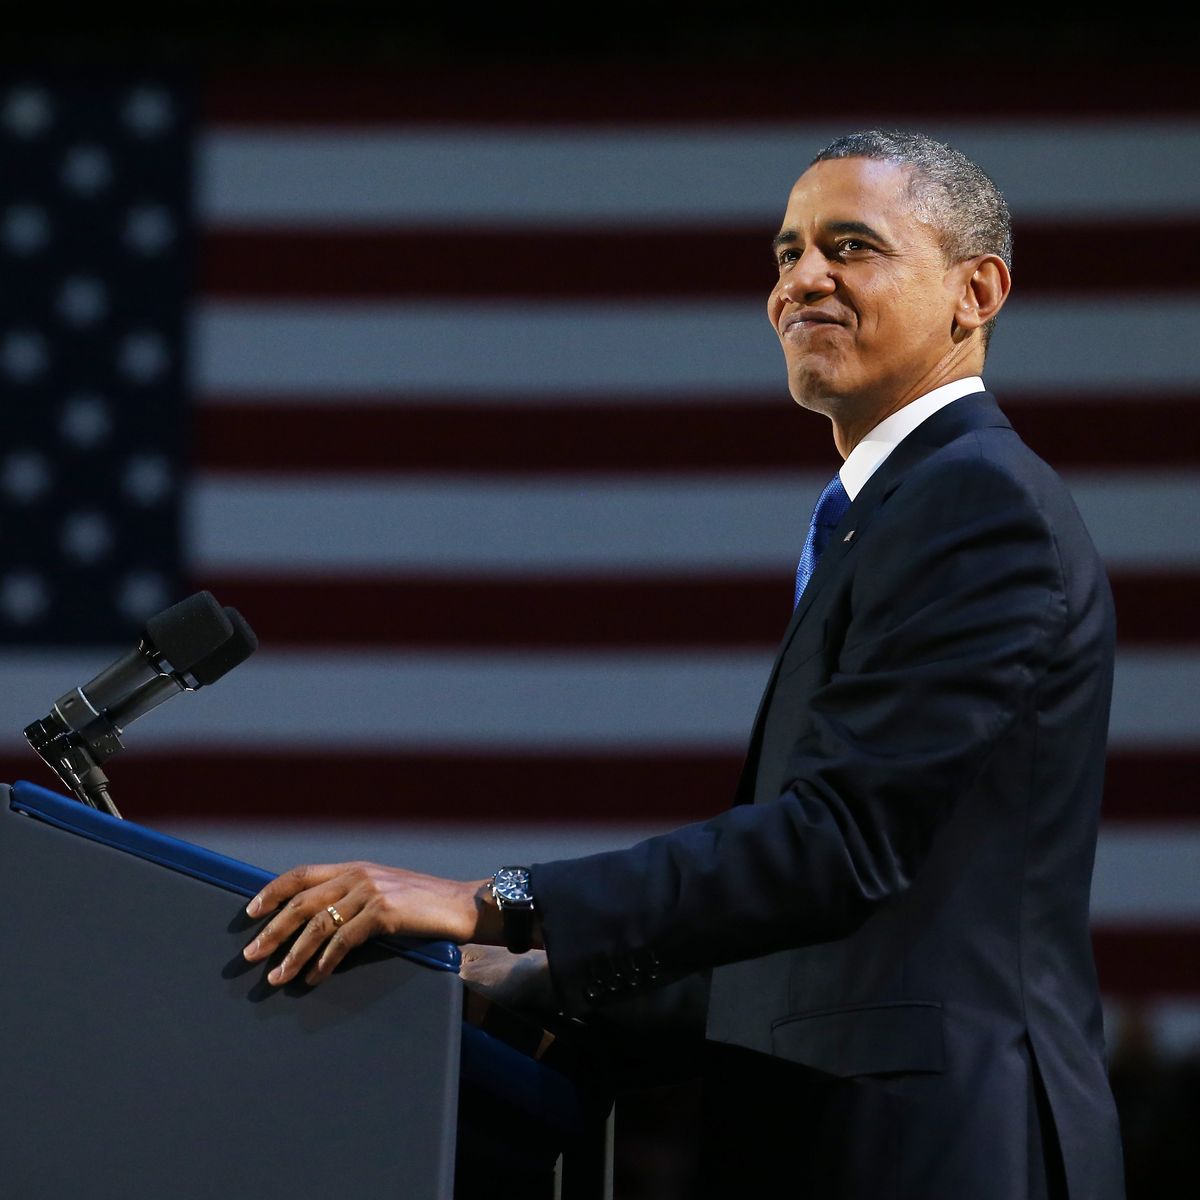 President Obama Holds Election Night Event In Chicago